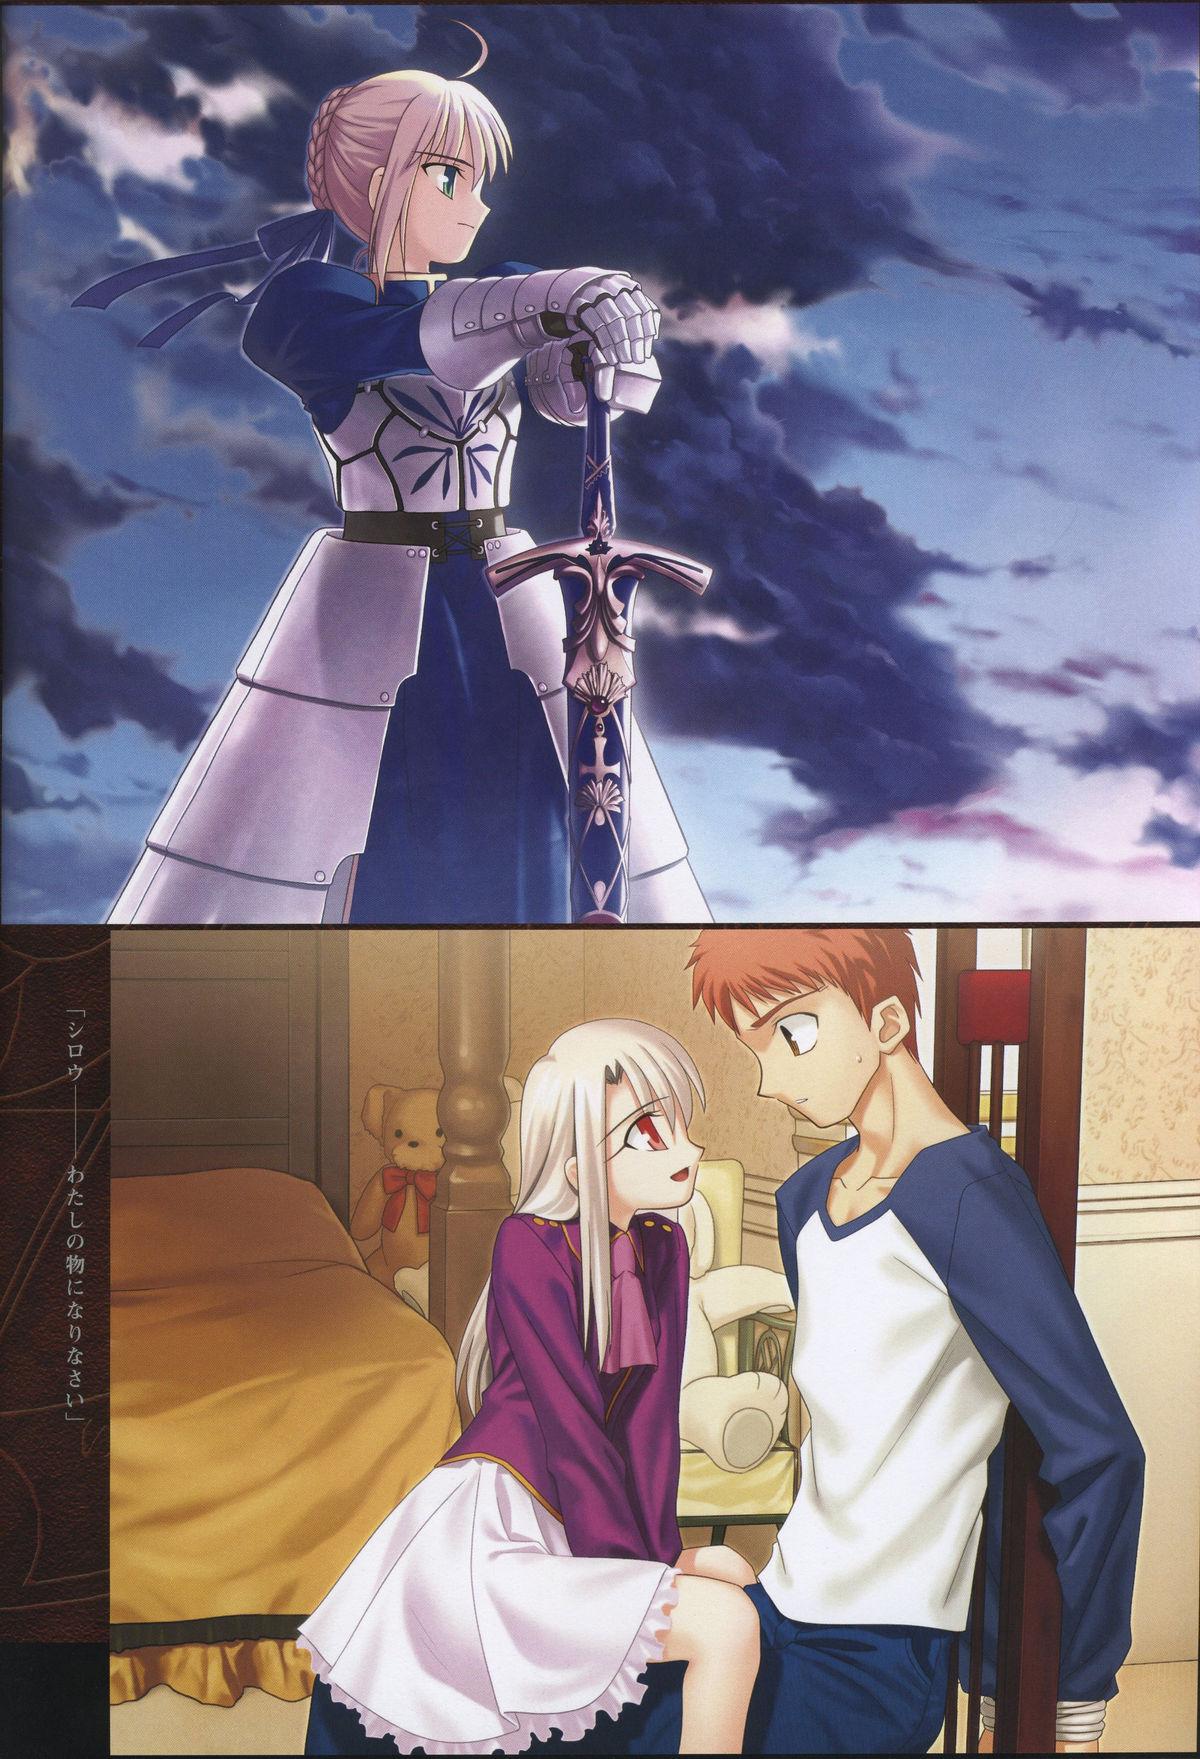 Fate/complete material I - Art material. 27